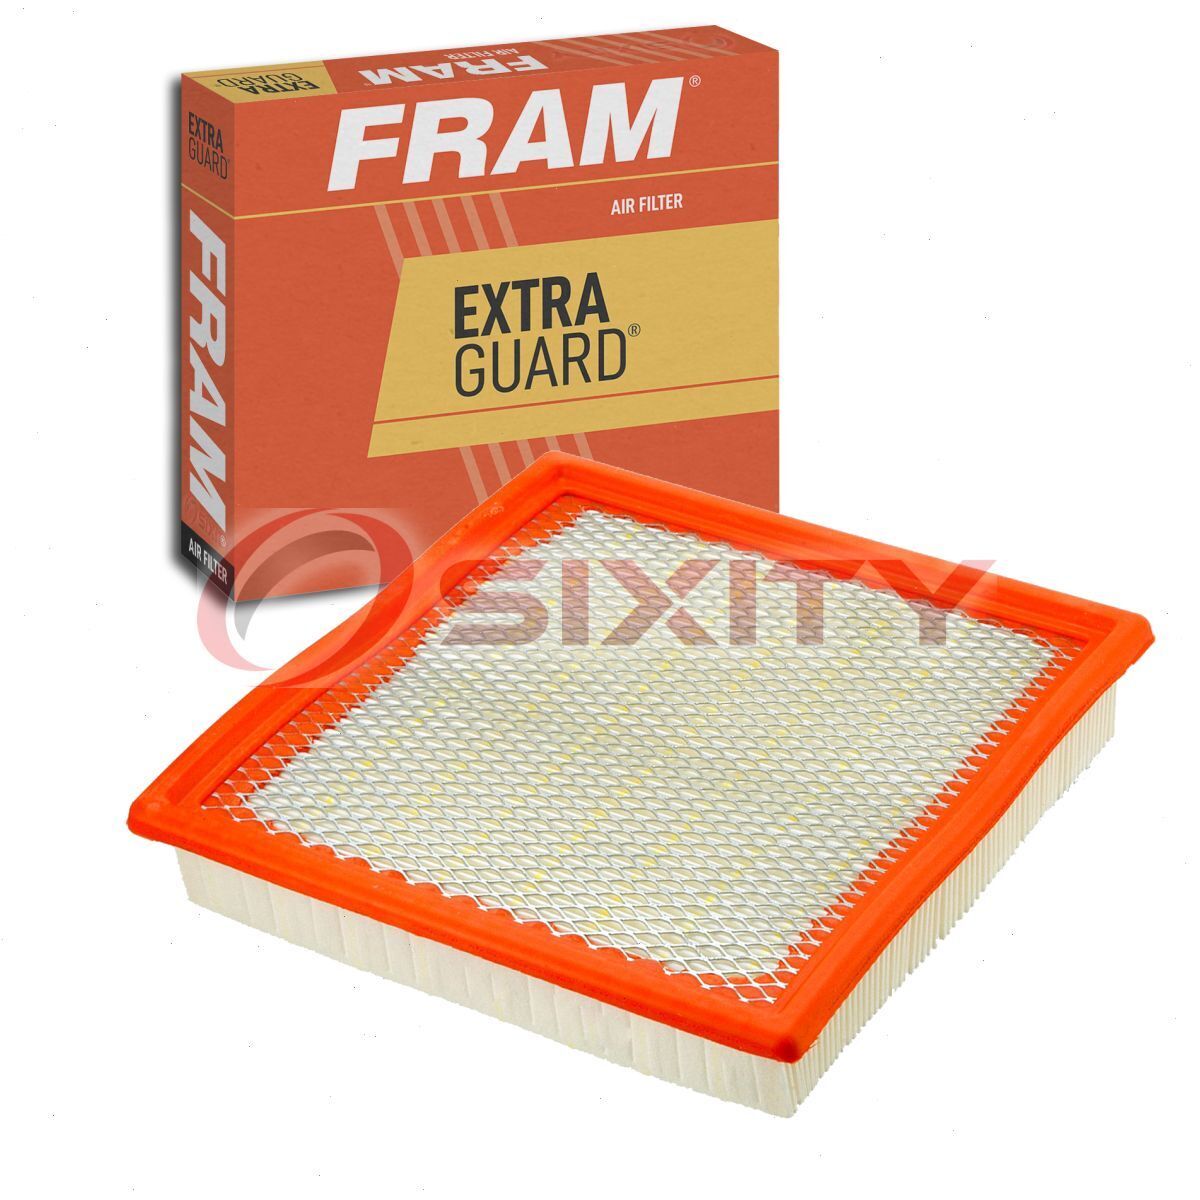 FRAM Extra Guard Air Filter for 2005-2010 Ford Mustang 4.6L V8 Intake Inlet gv